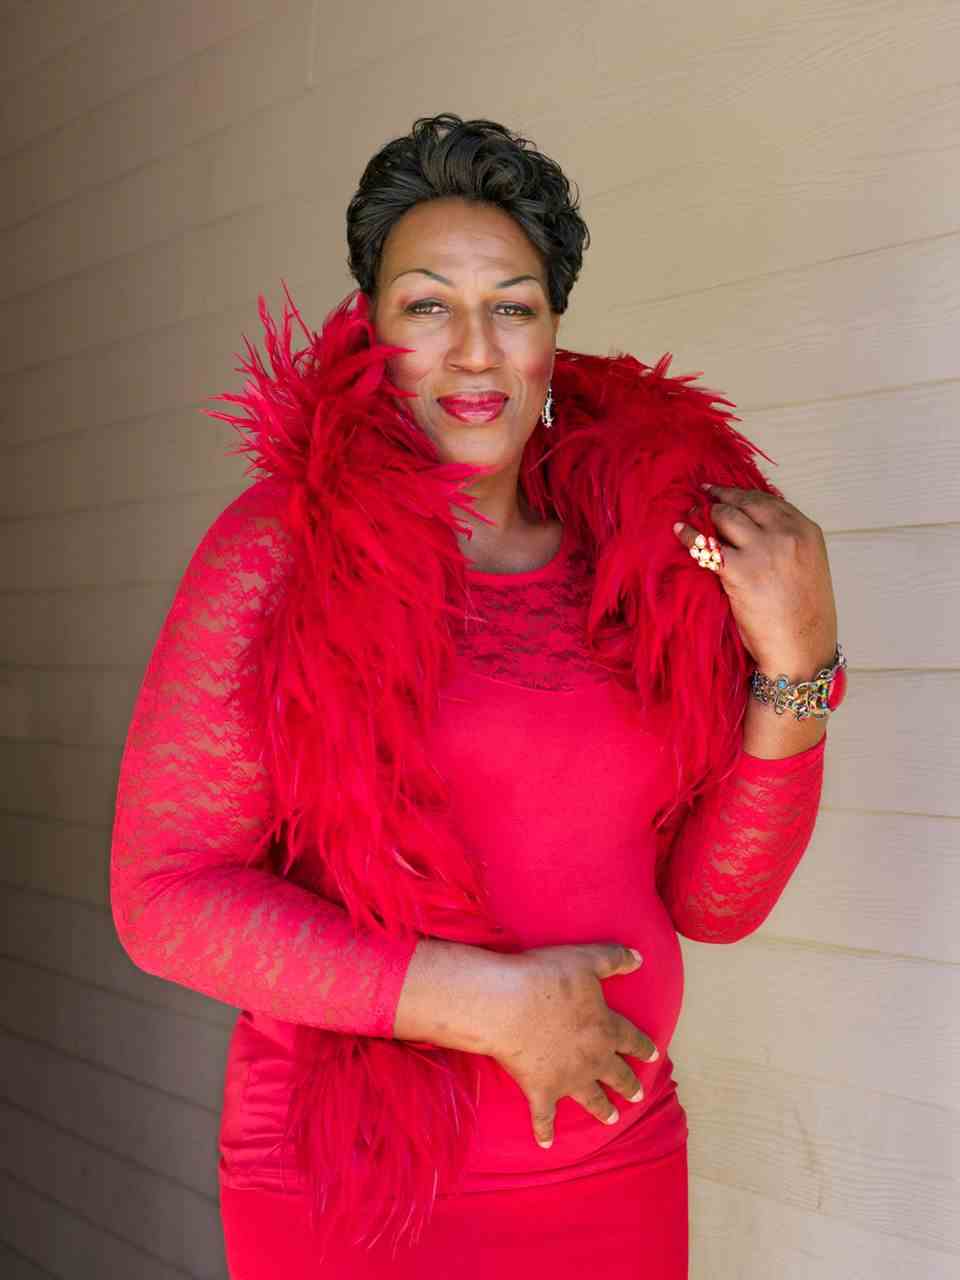 A tall African trans woman in a bright red dress and boa